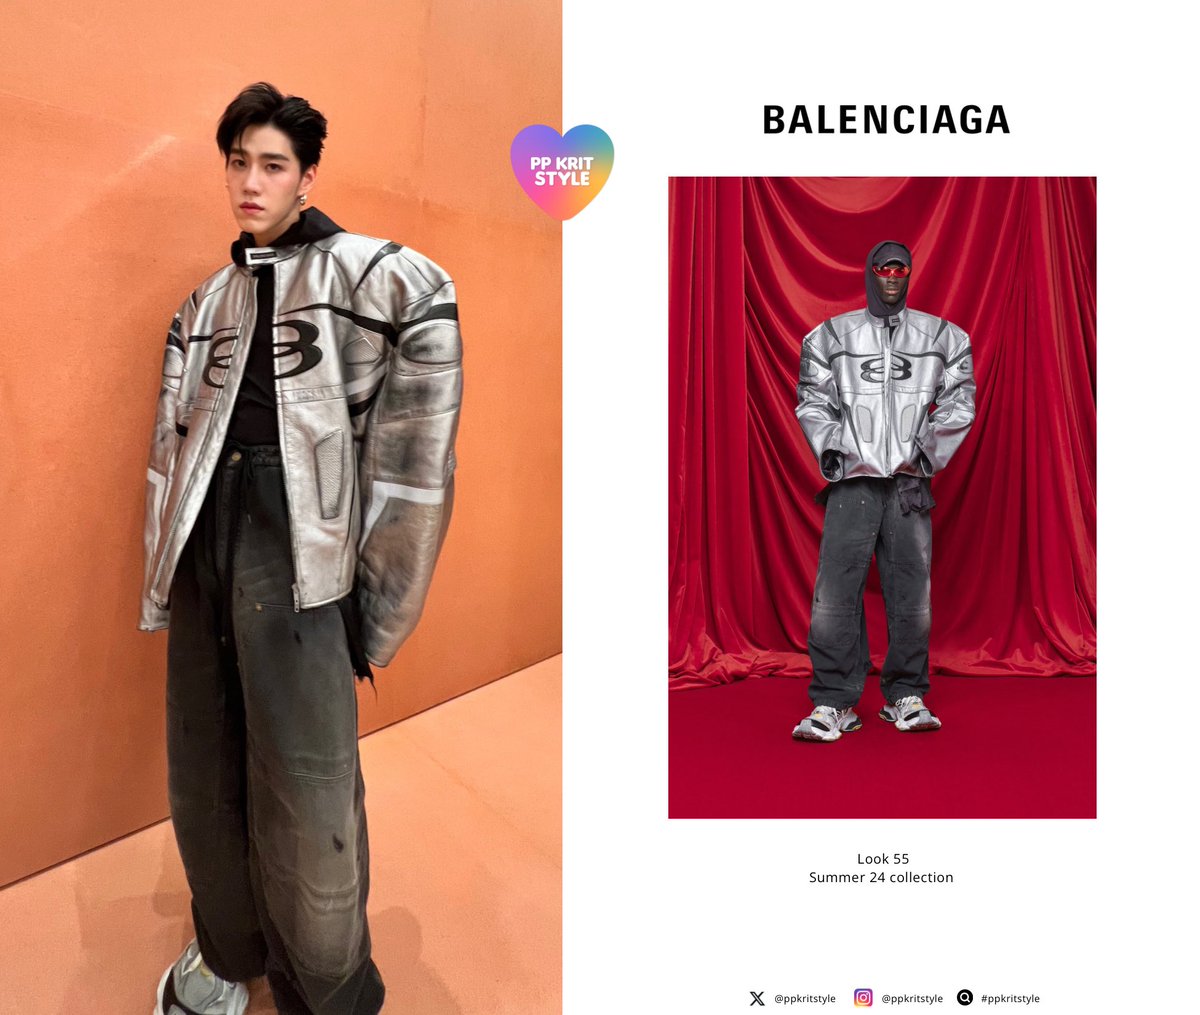 PP KRIT STYLE : #PPCitizenofChidlom 

#BALENCIAGA LOOK 55/SUMMER 24
- Unity Sports Icon Racer Jacket
- Double Knee Pants
- Inside-Out Long Sleeve Hooded T-Shirt Fitted
- Cut Ear Cuff
- Force Xs Earrings
- Cargo Sneaker

#CentralChidlomLuxeNightOut
#ppkritt #ppkritstyle